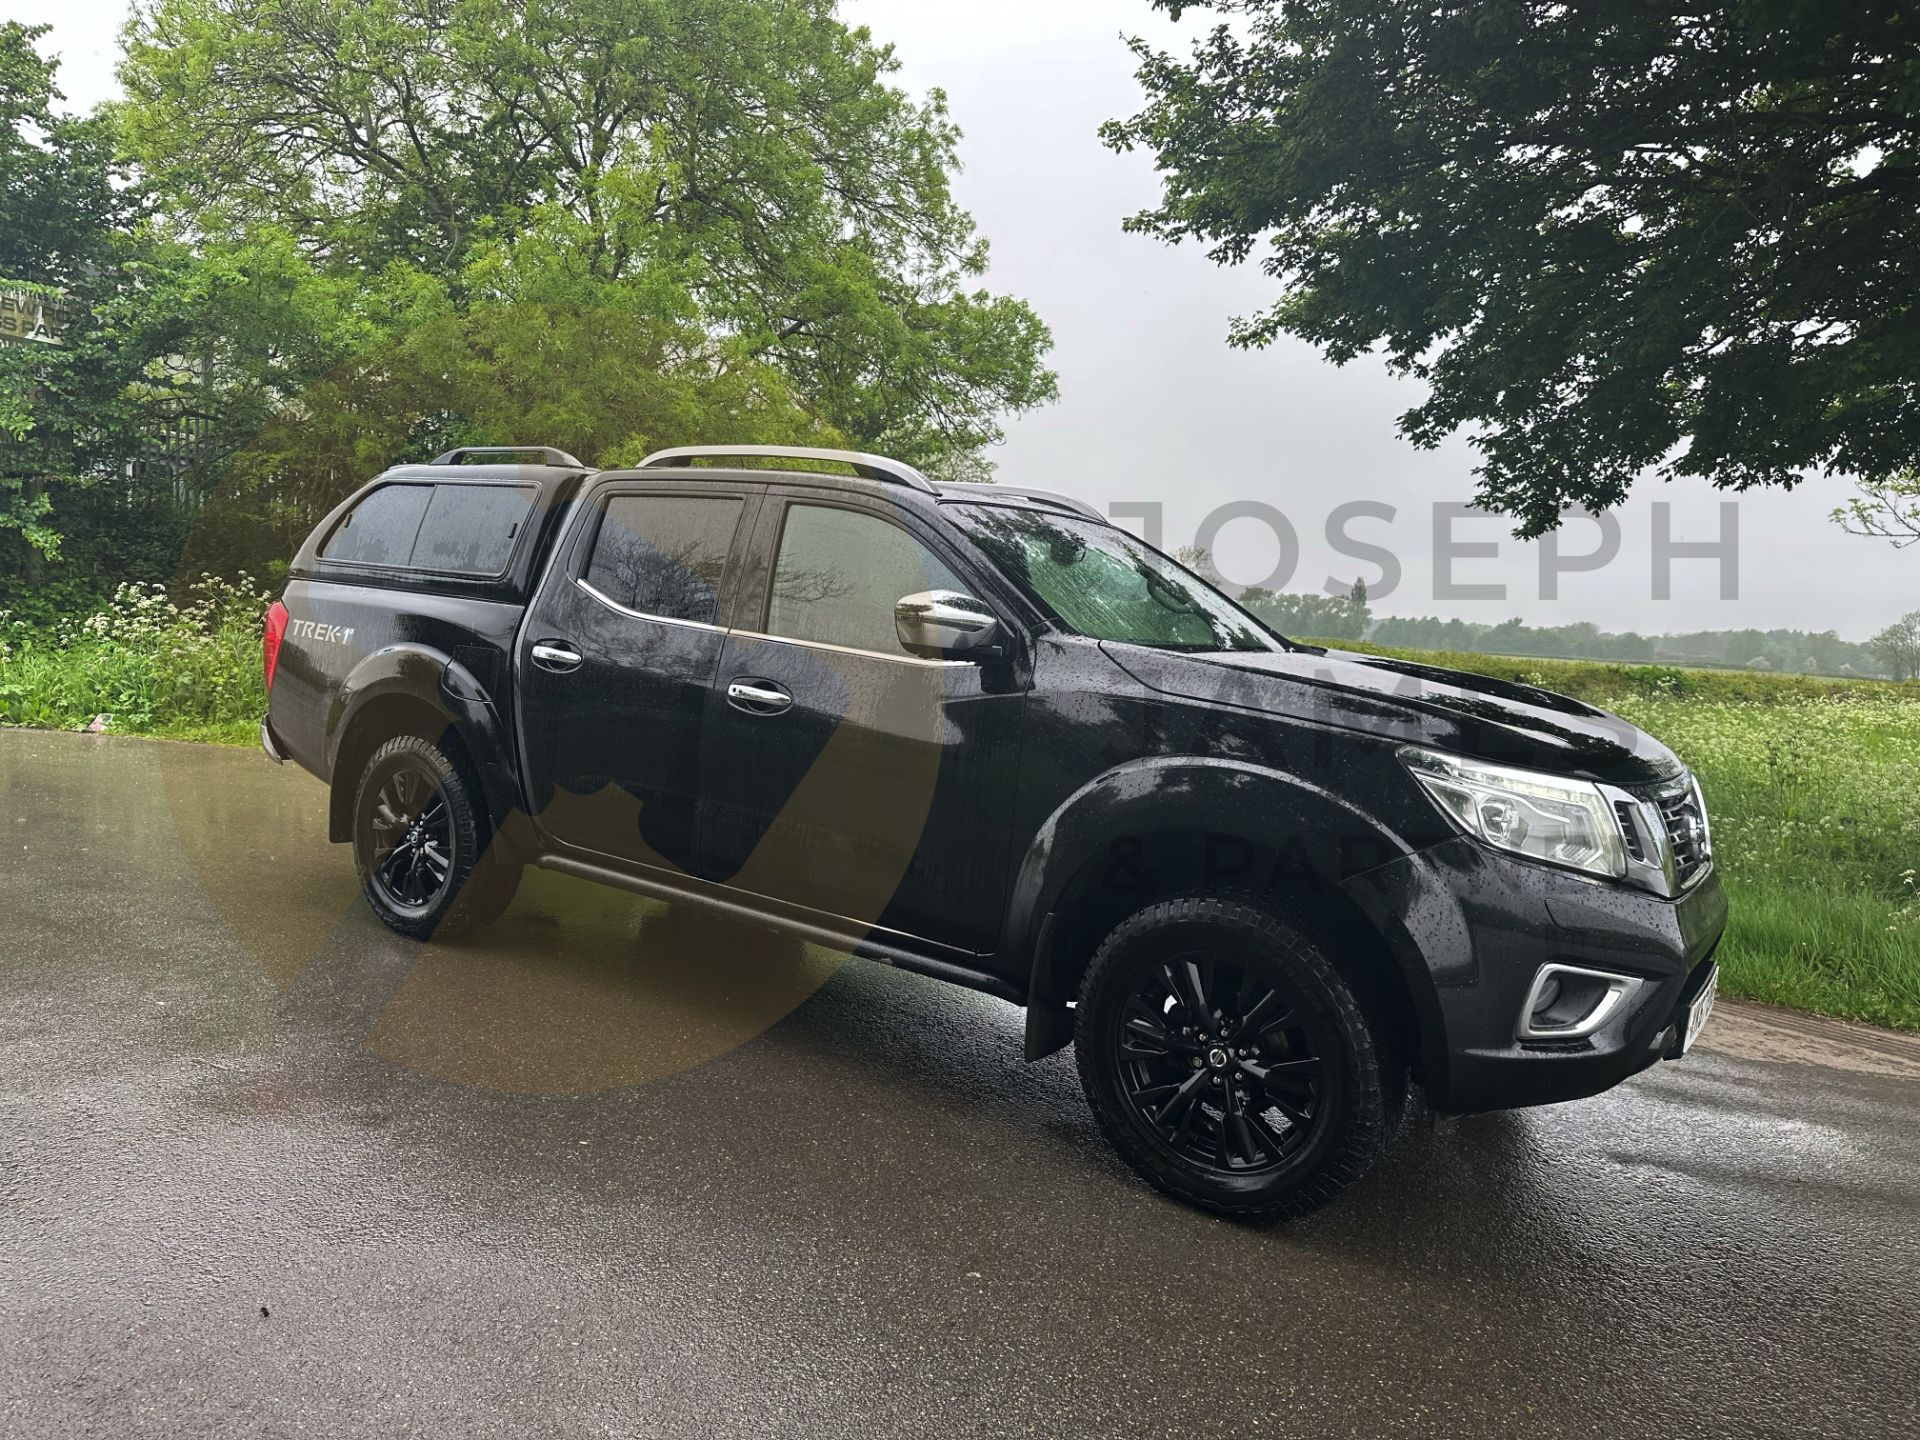 (ON SALE) NISSAN NAVARA *TREK-1 EDITION* DOUBLE CAB PICK-UP (2018 - EURO 6) 2.3 DCI - AUTOMATIC - Image 2 of 52